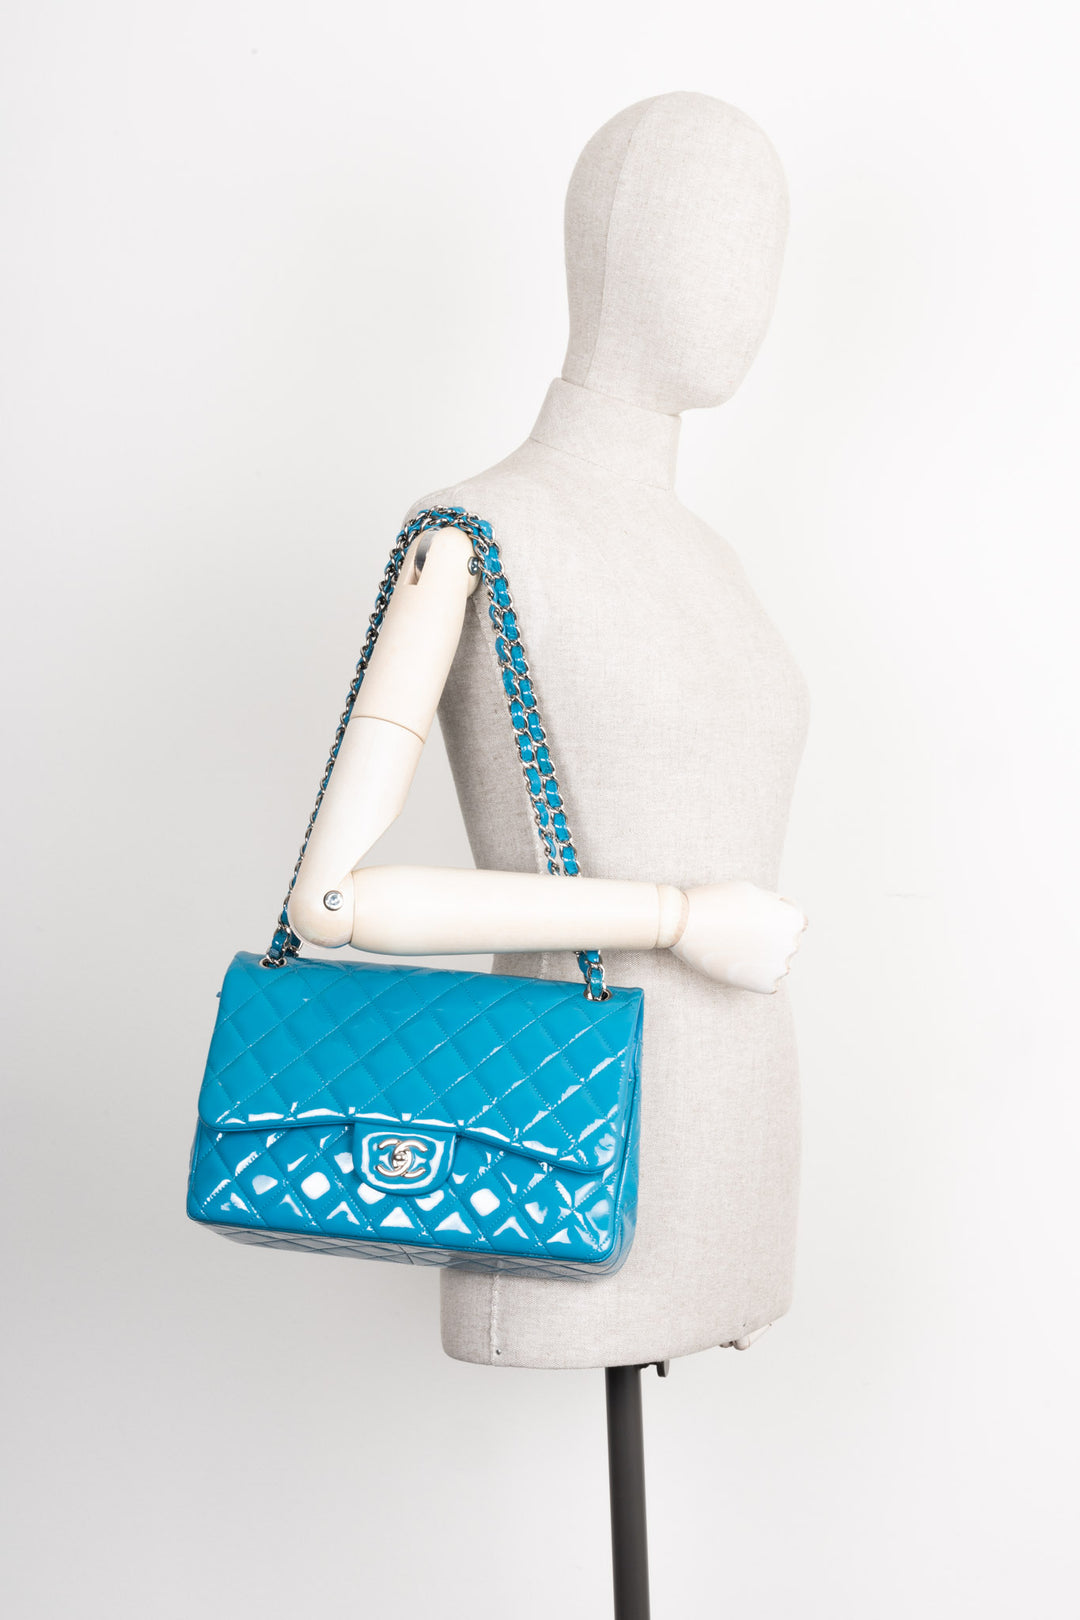 CHANEL Double Flap Bag Large Patent Leather Bright Blue